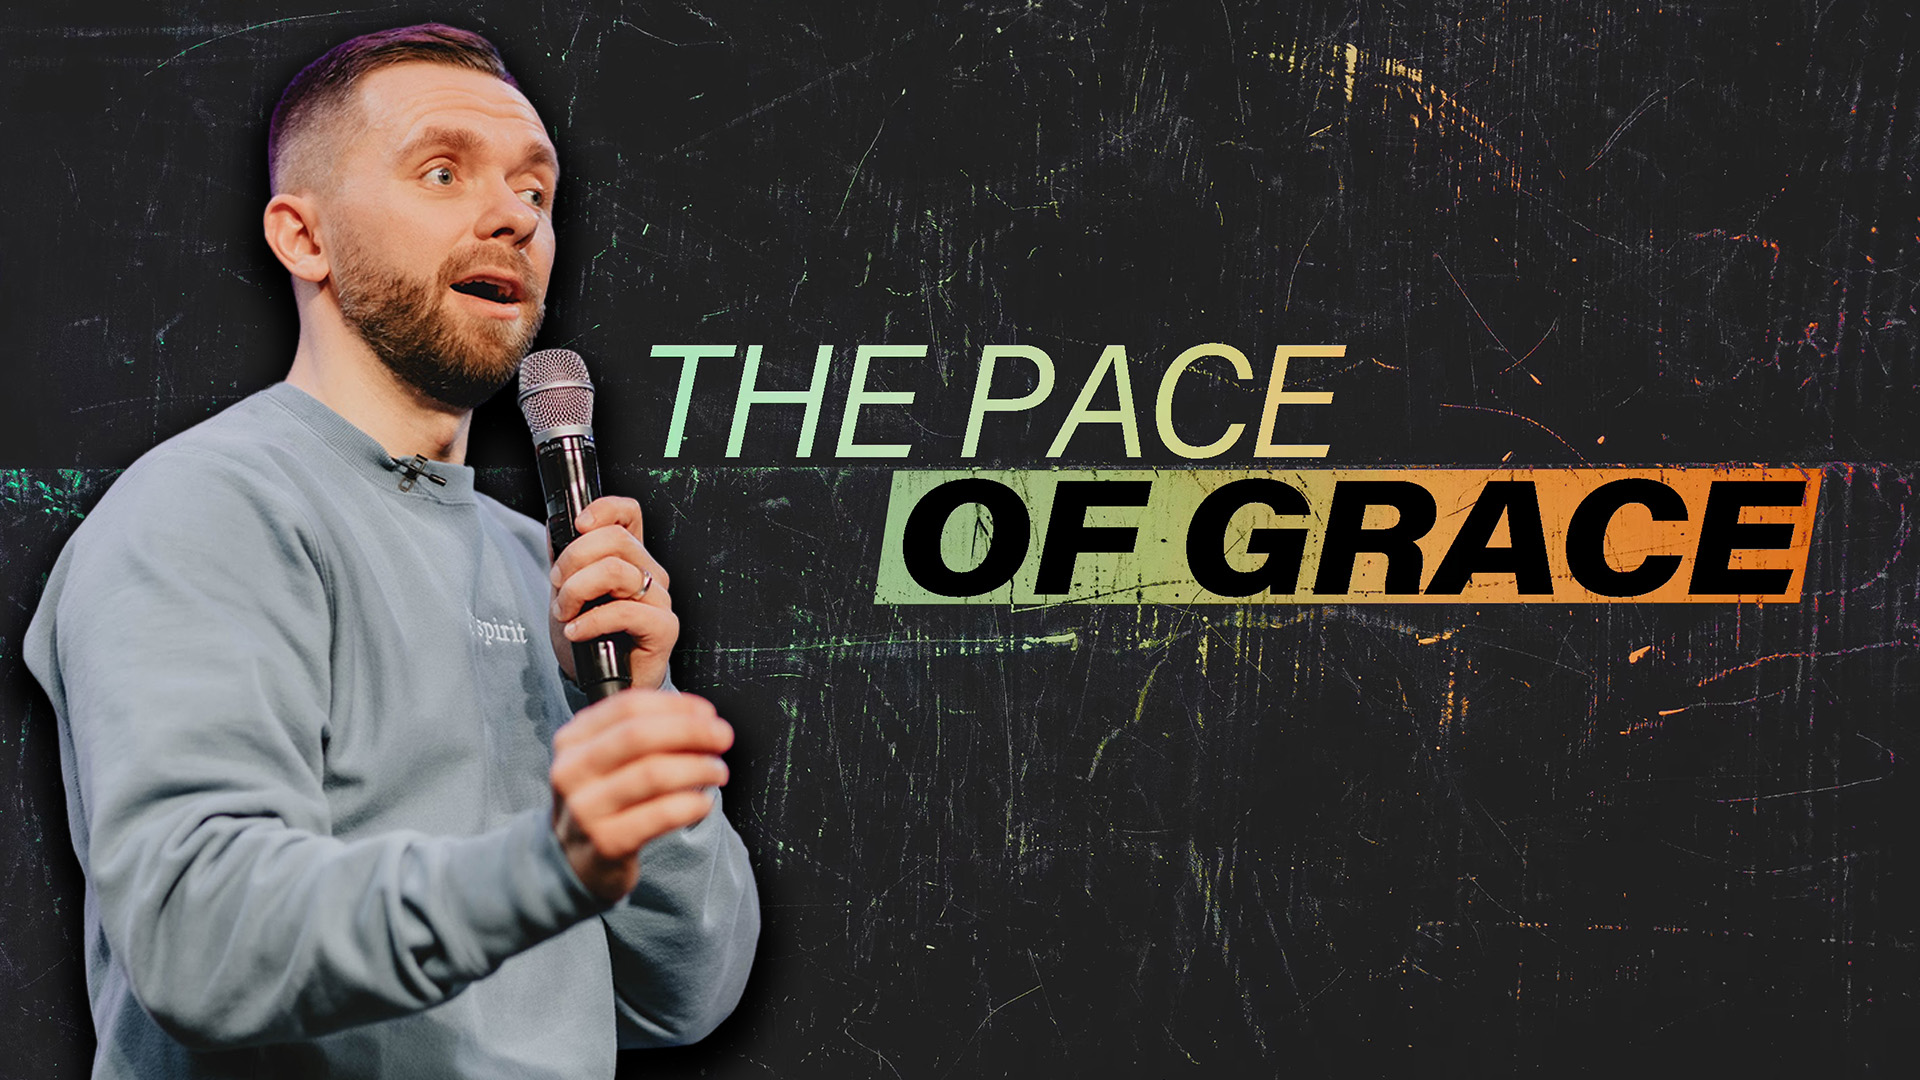 Featured image for “The Pace of Grace”